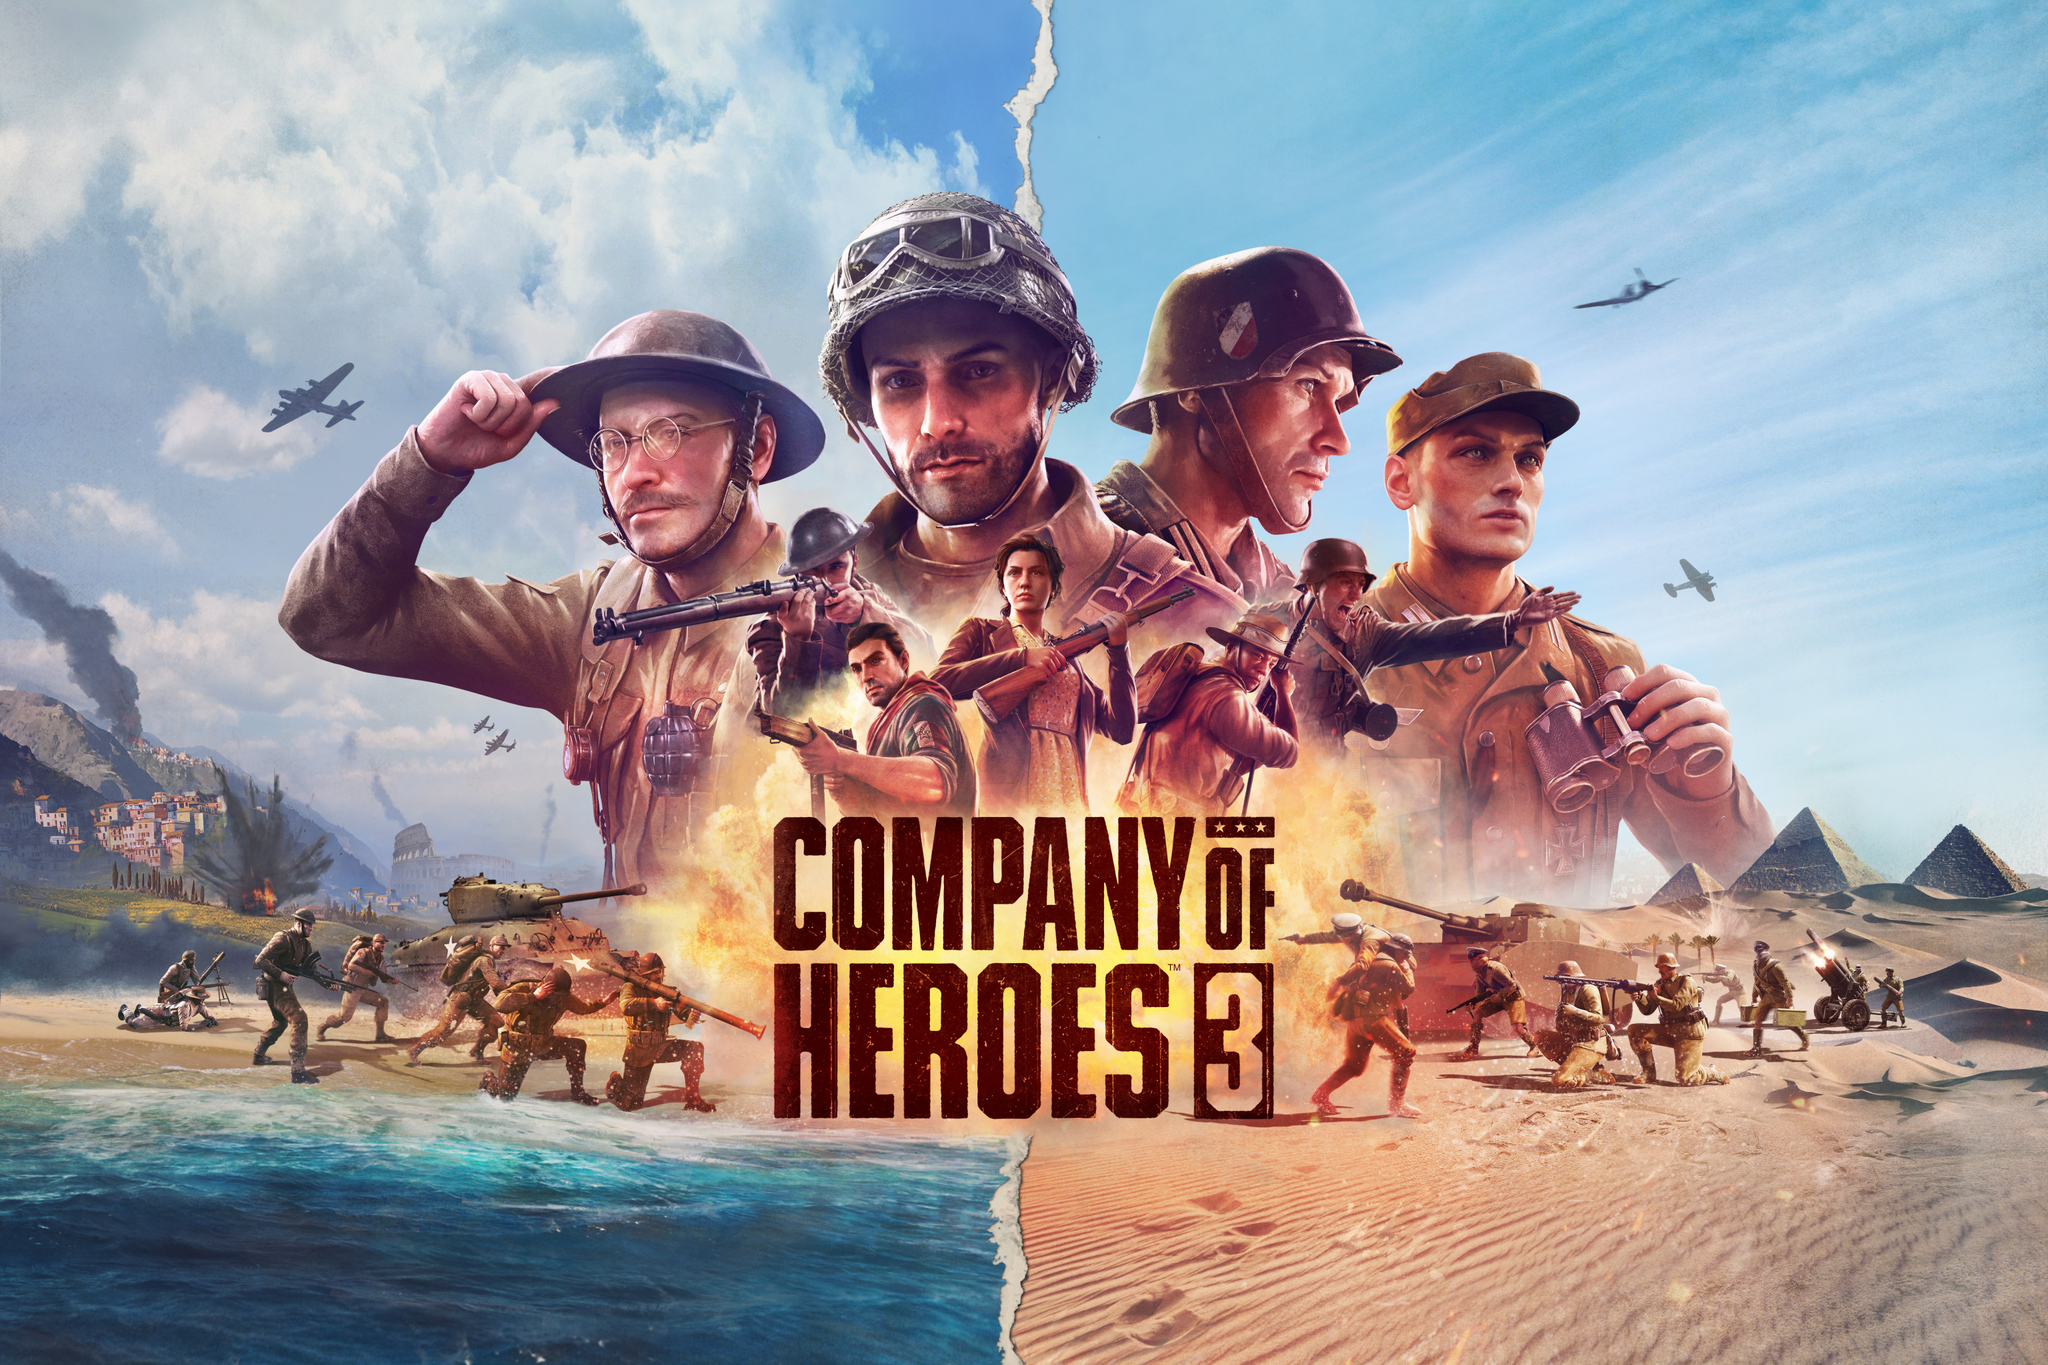 COMPANY OF HEROES 3 IS OUT NOW ON PC! [PRESS RELEASE]